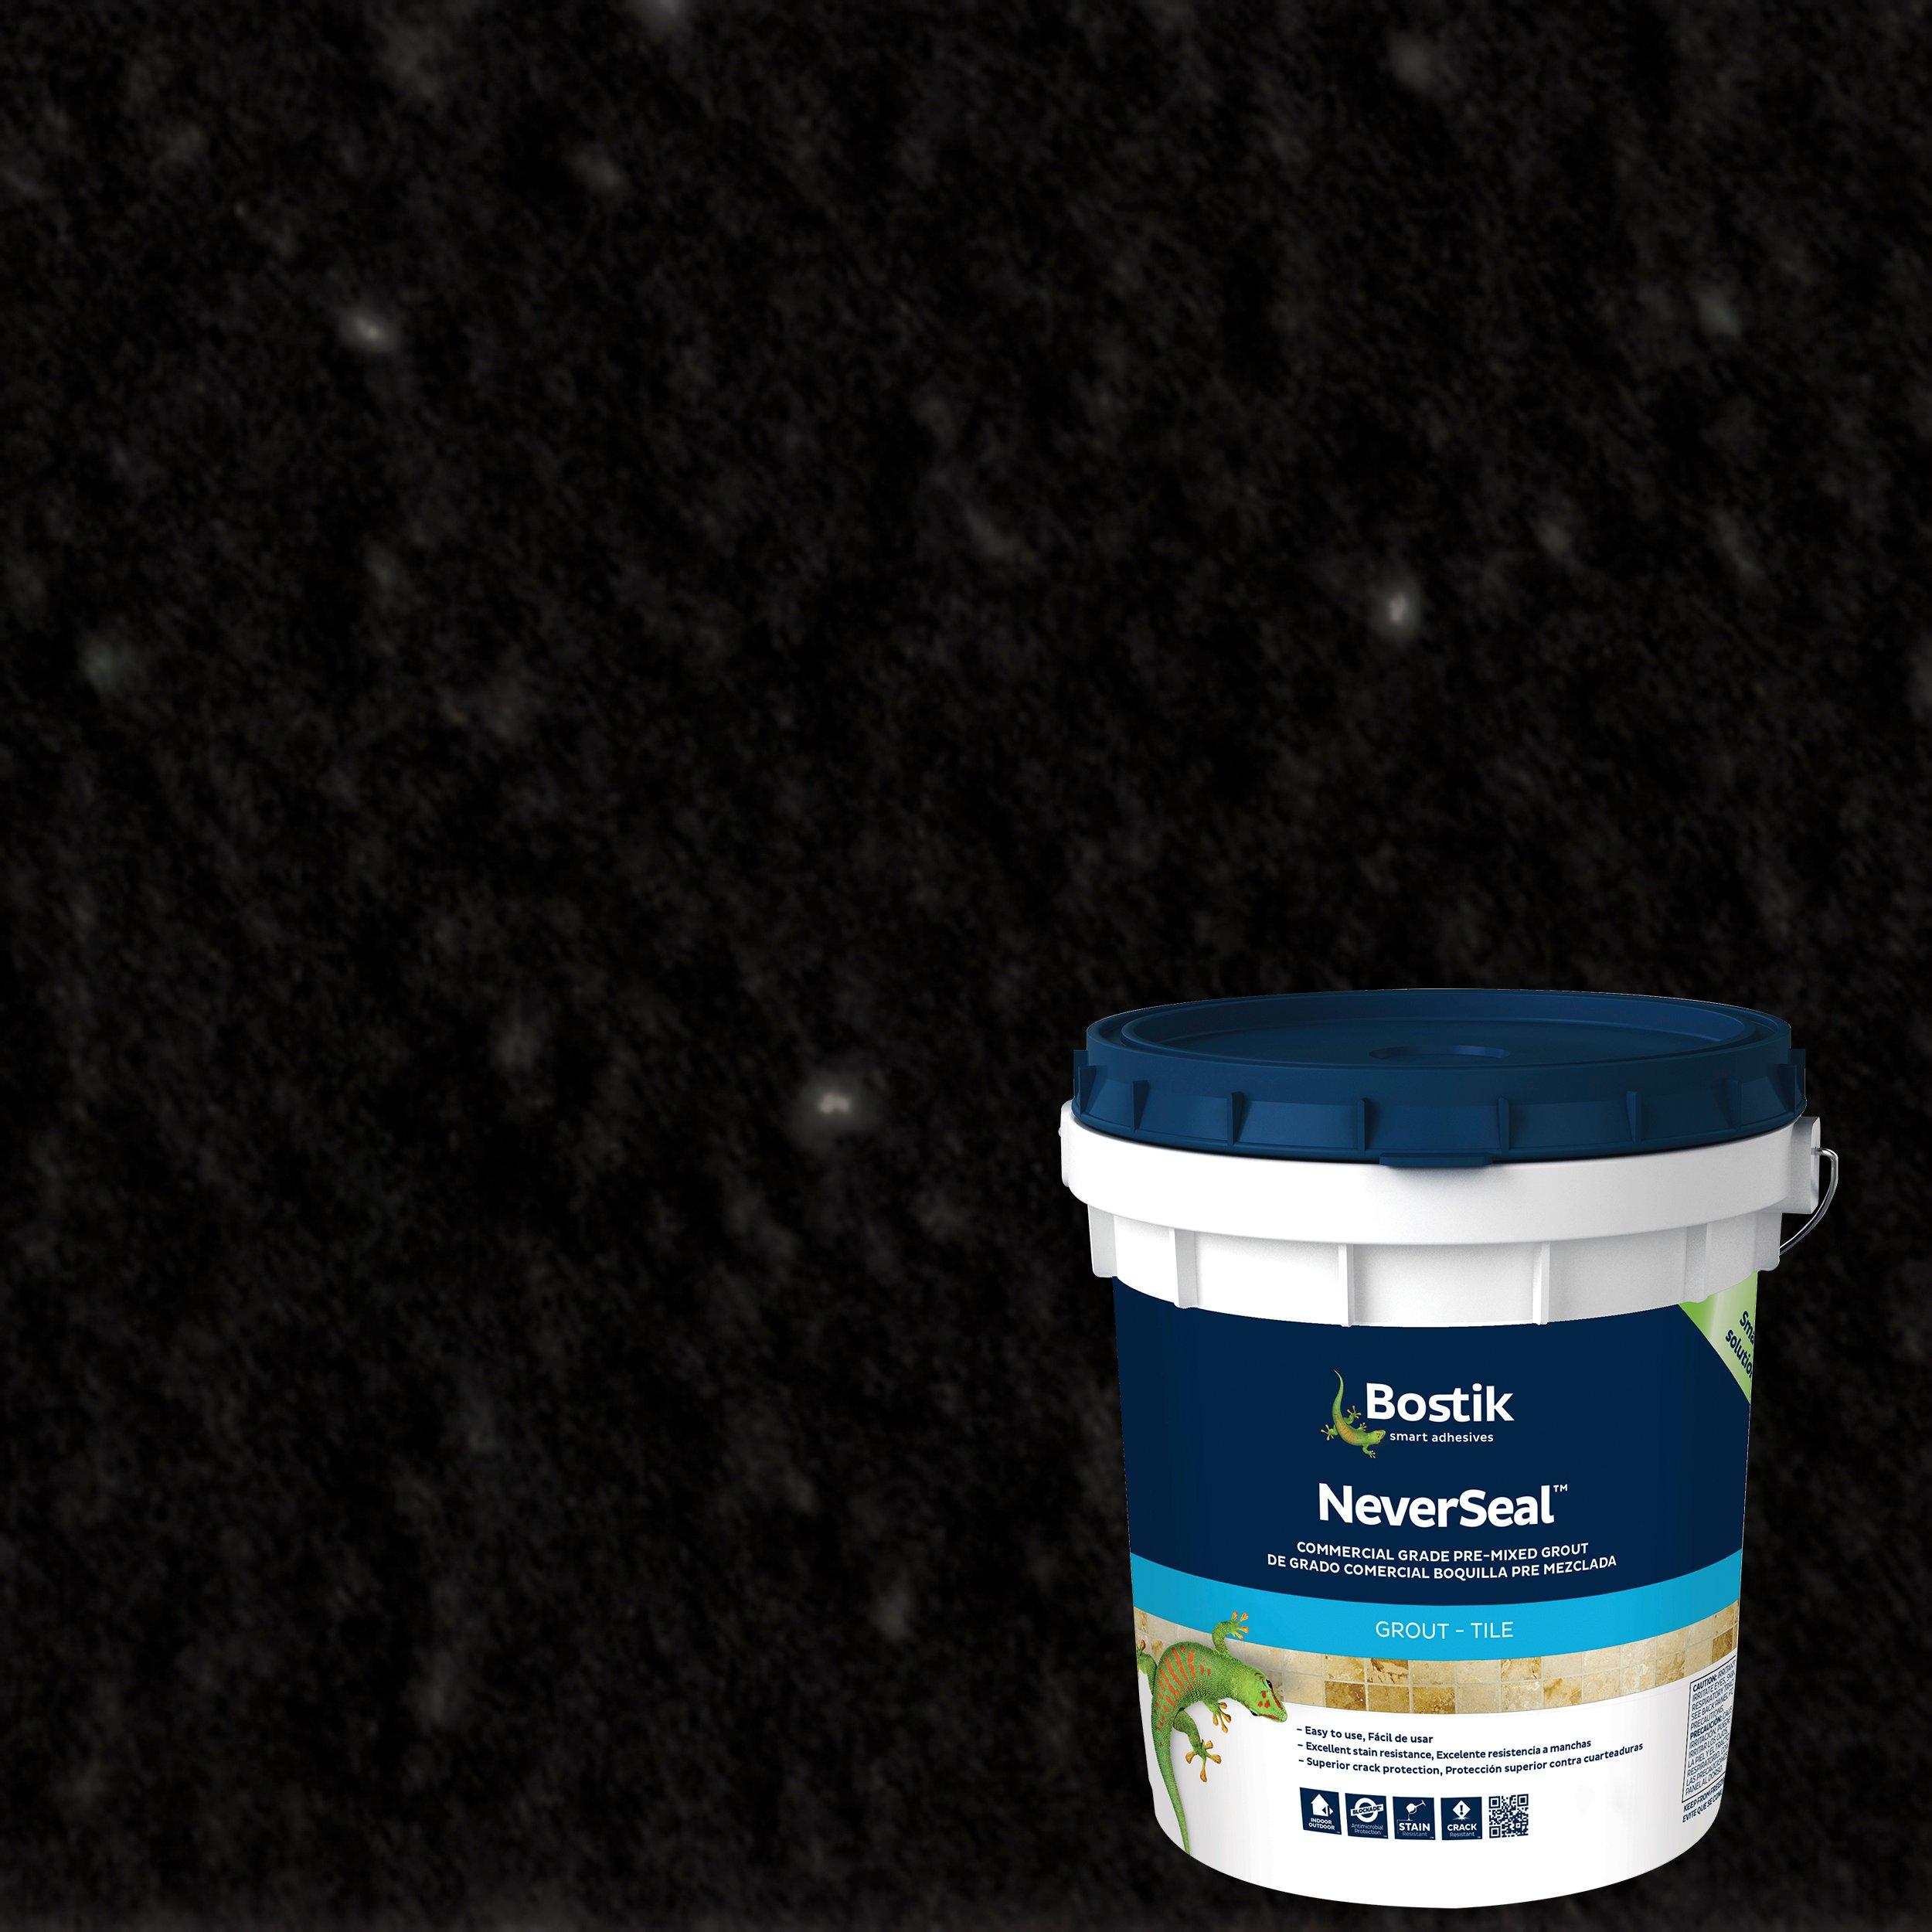 Bostik Neverseal Charcoal Black Pre-Mixed Commercial Grade Grout